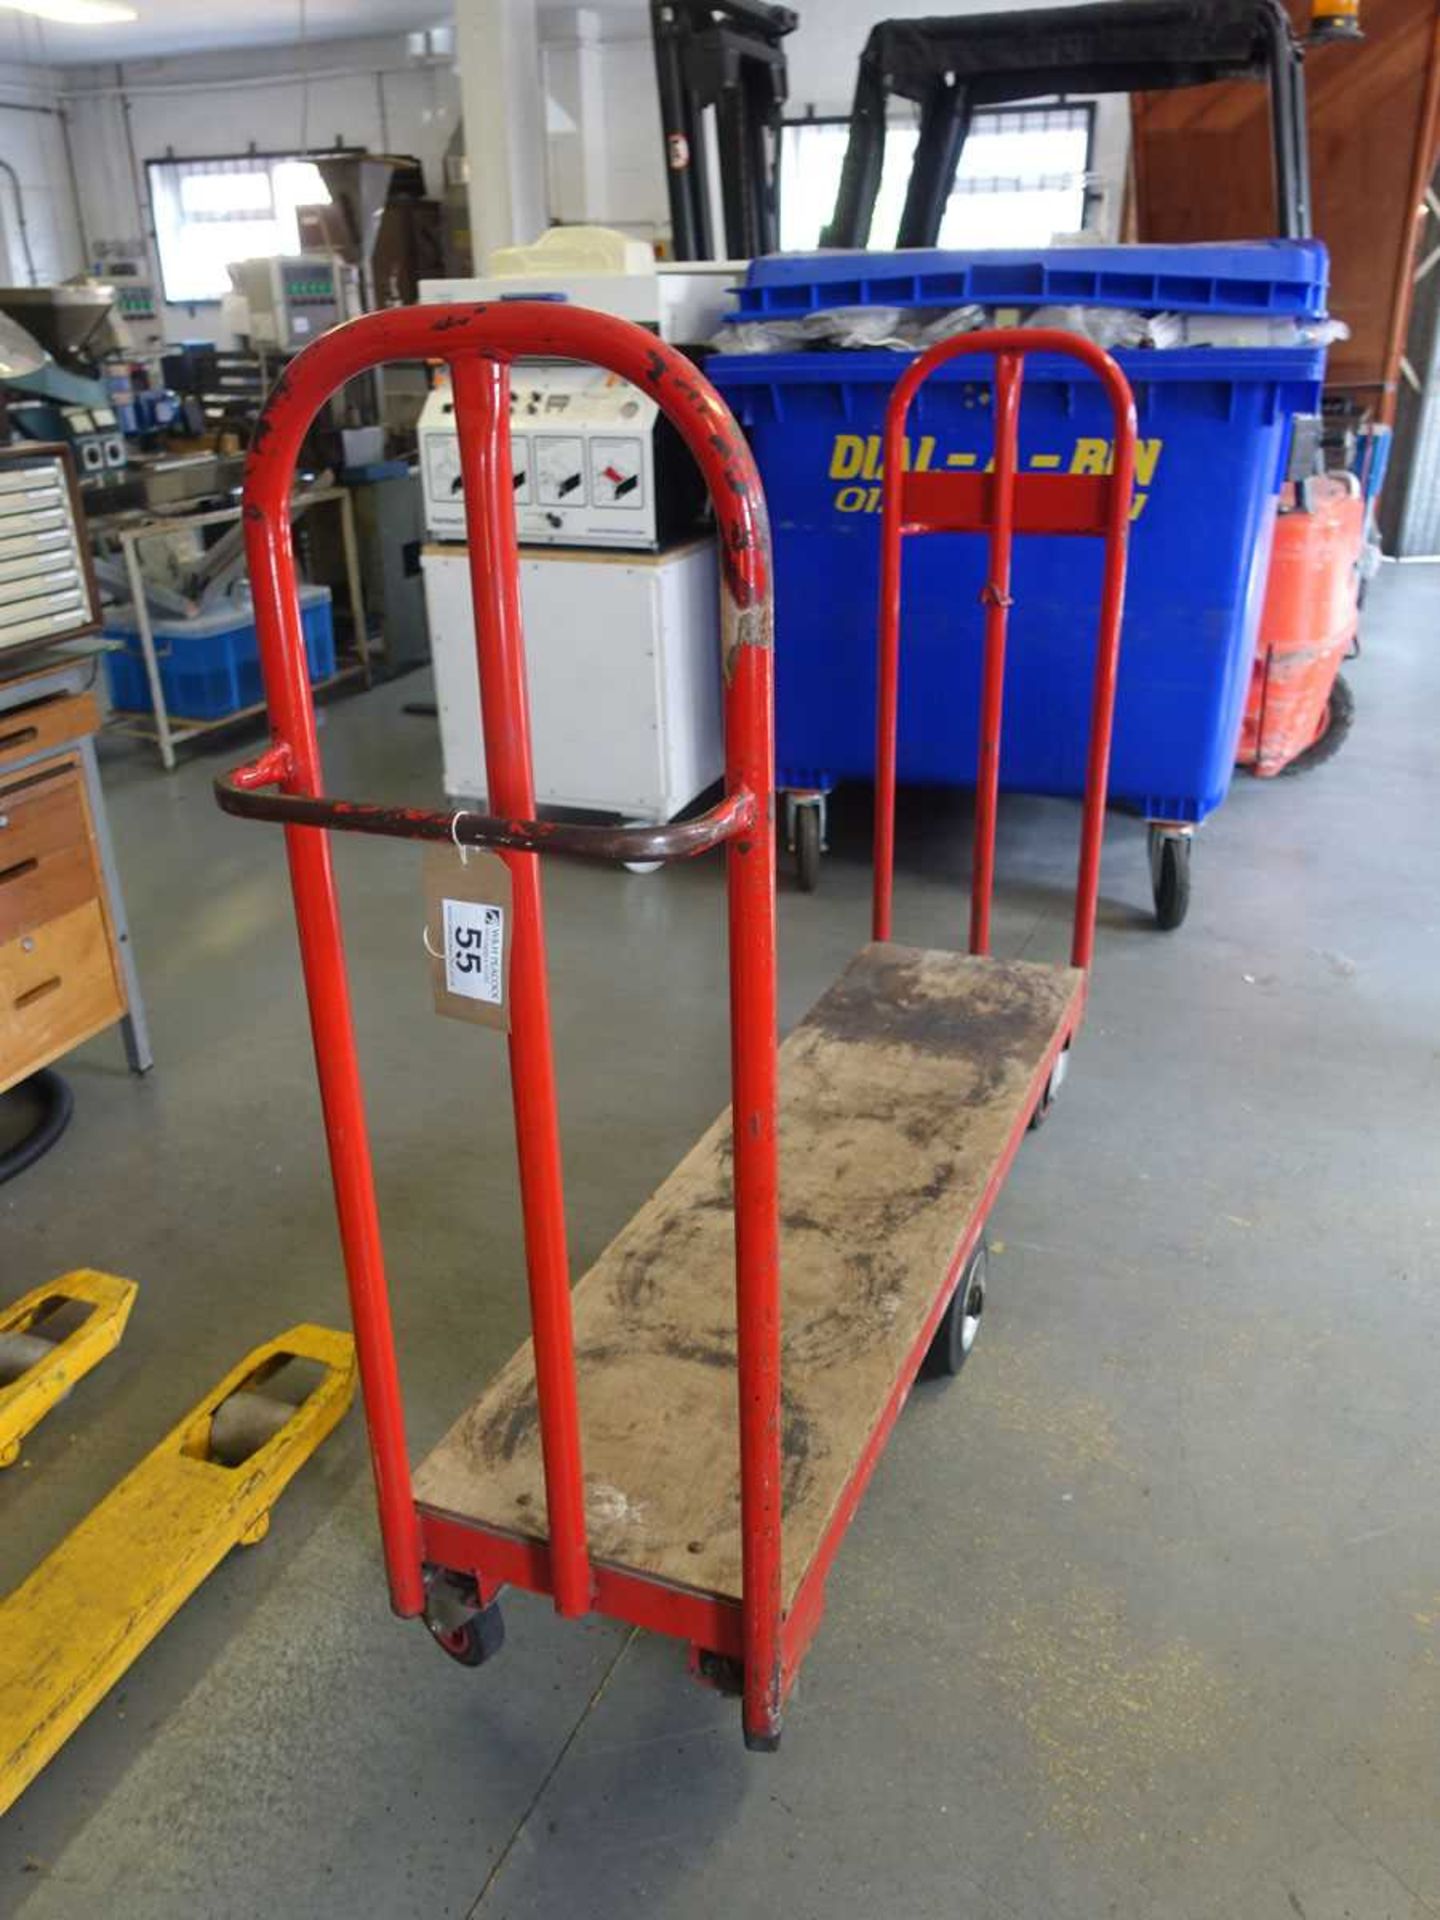 +VAT Narrow double ended platform trolley, with a small shopping trolley and double sided trolley